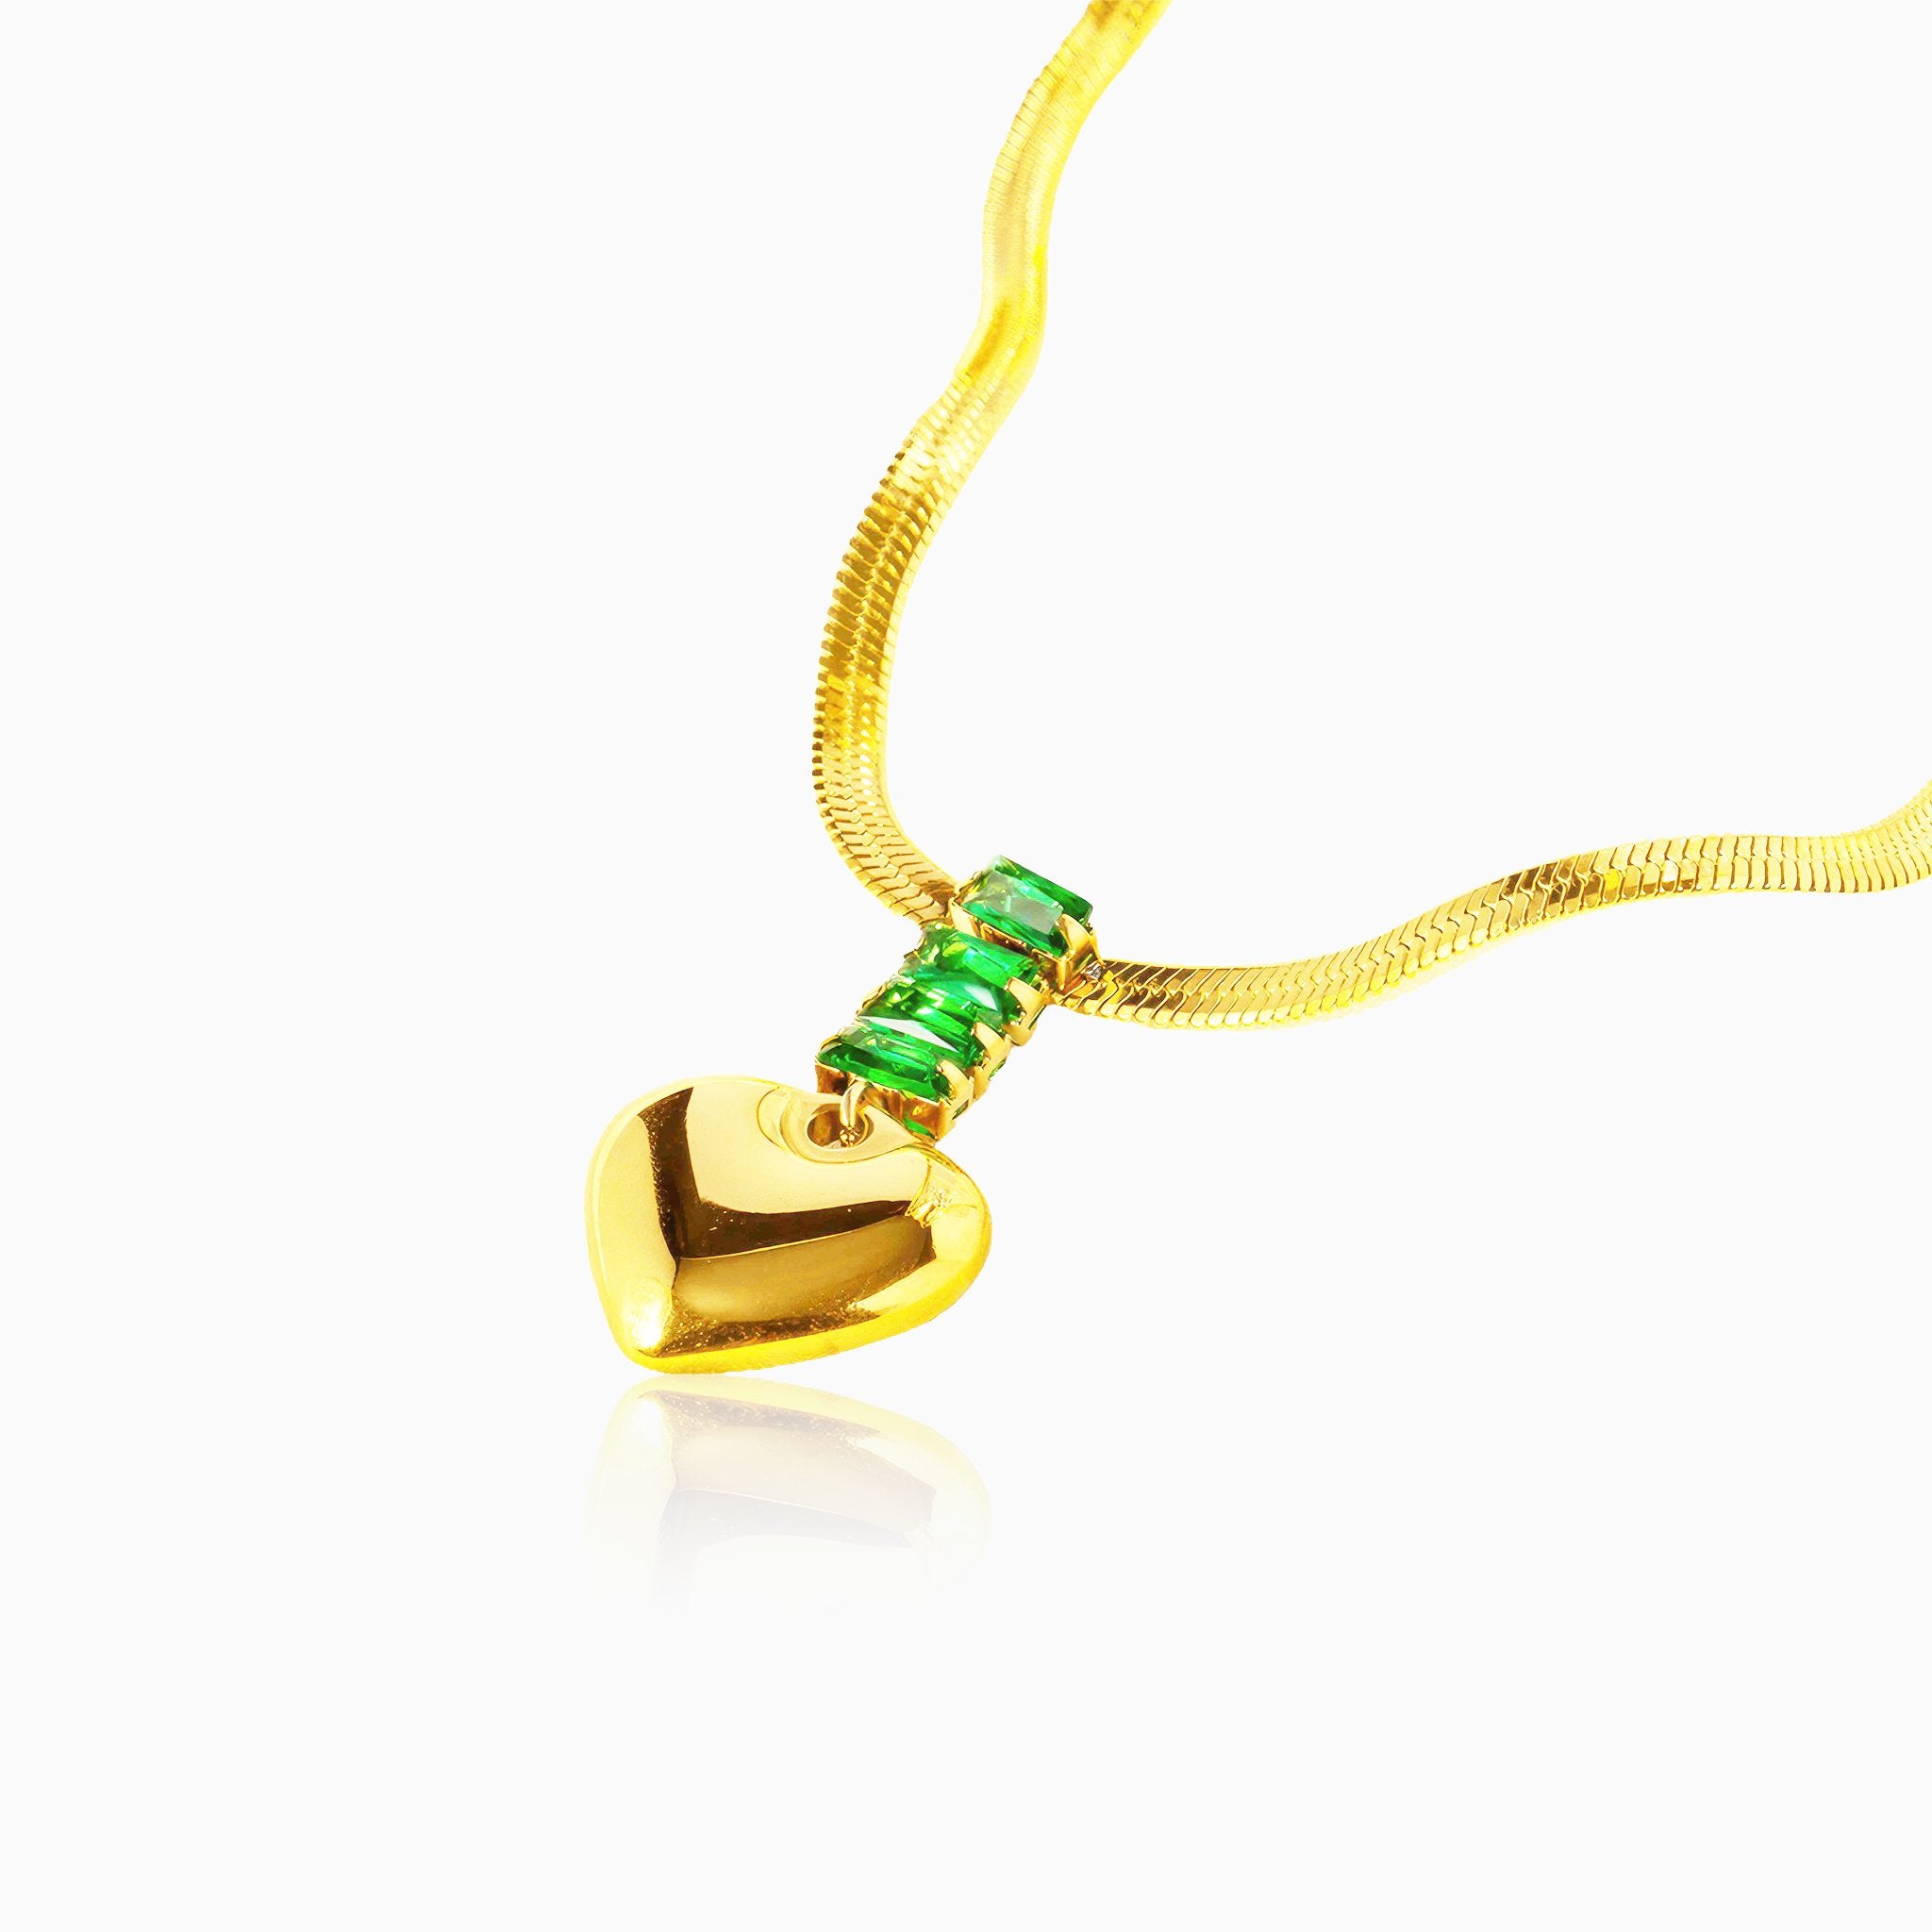 Retro Heart Gemstone Pendant Necklace - Nobbier - Necklace - 18K Gold And Titanium PVD Coated Jewelry